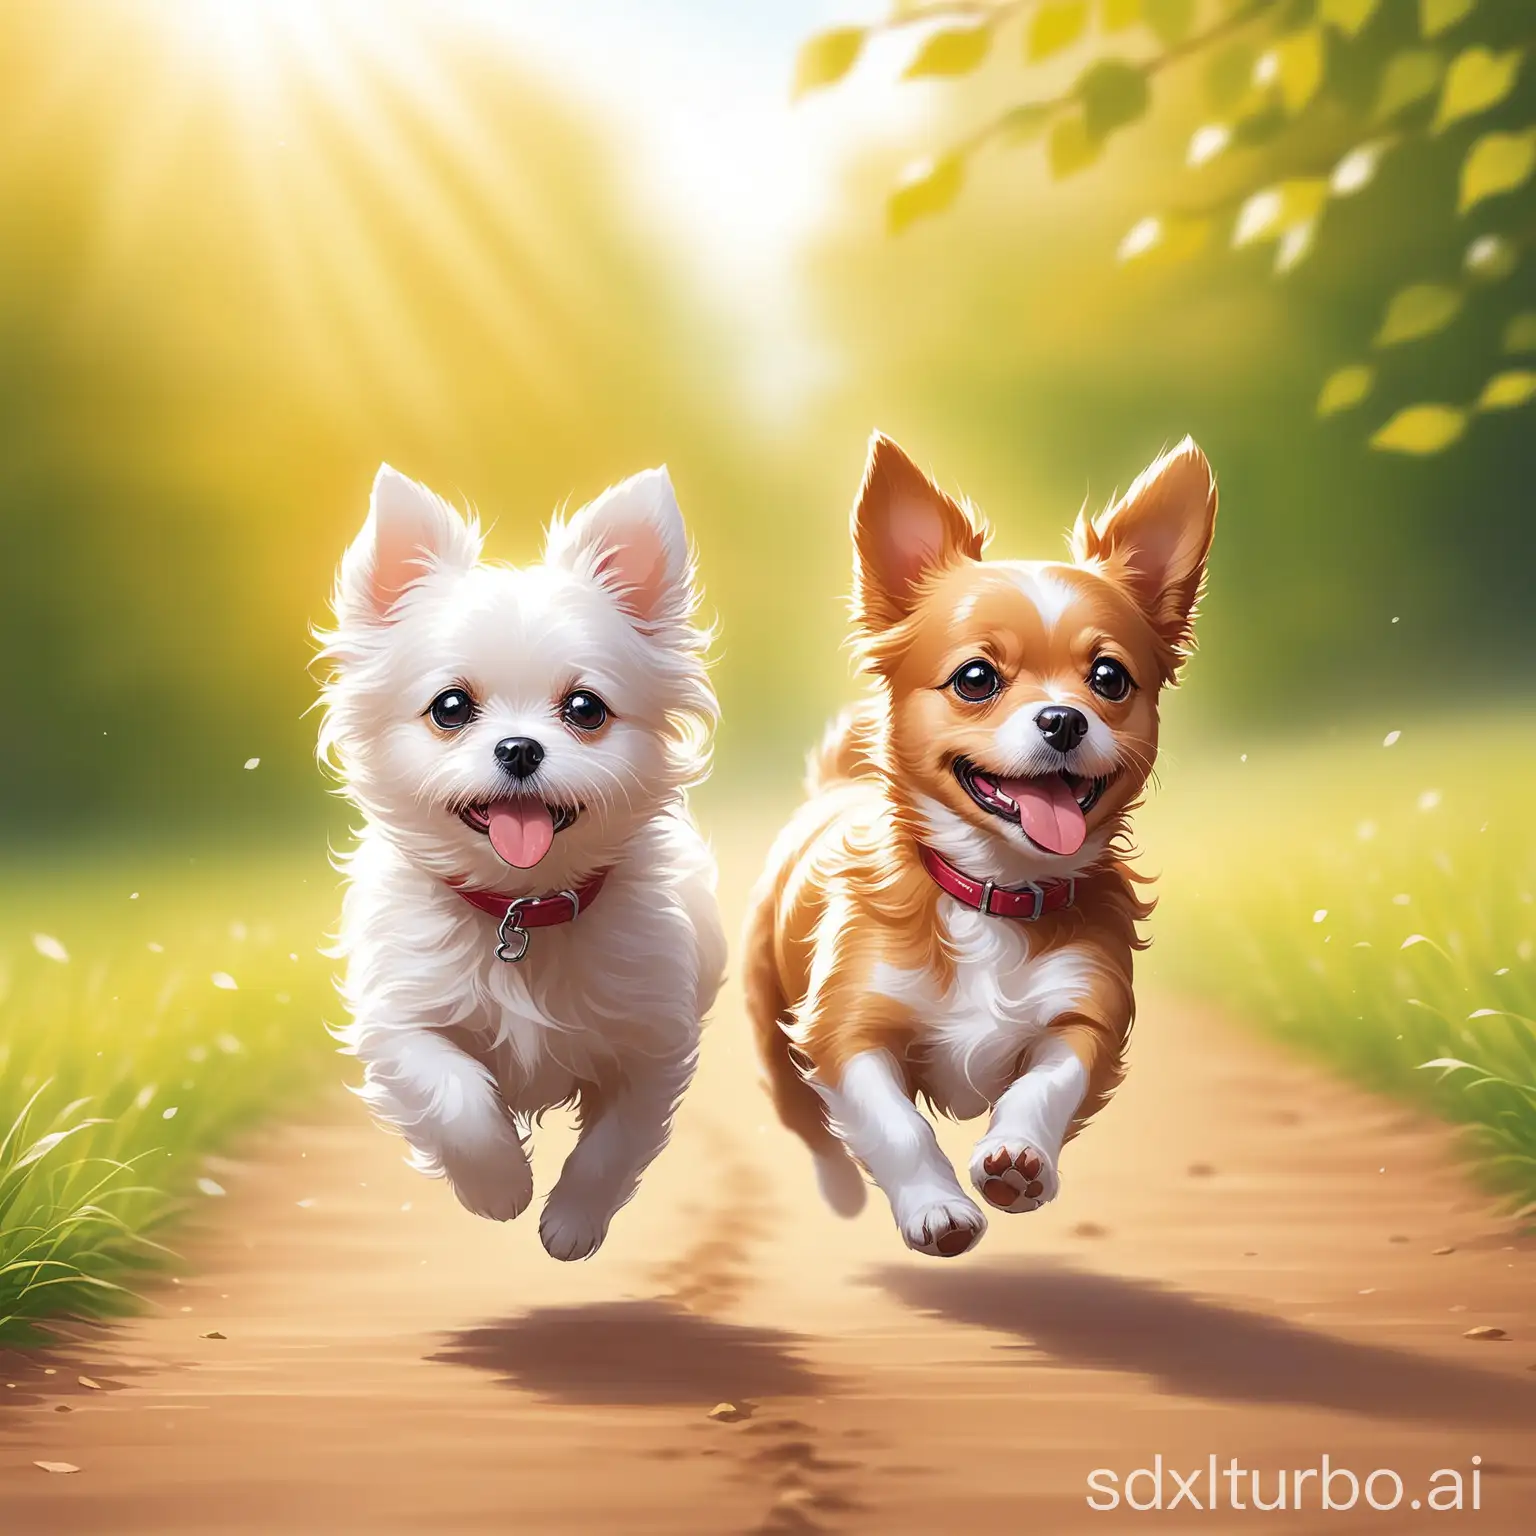 Playful-Pair-of-Small-Dogs-Running-Together